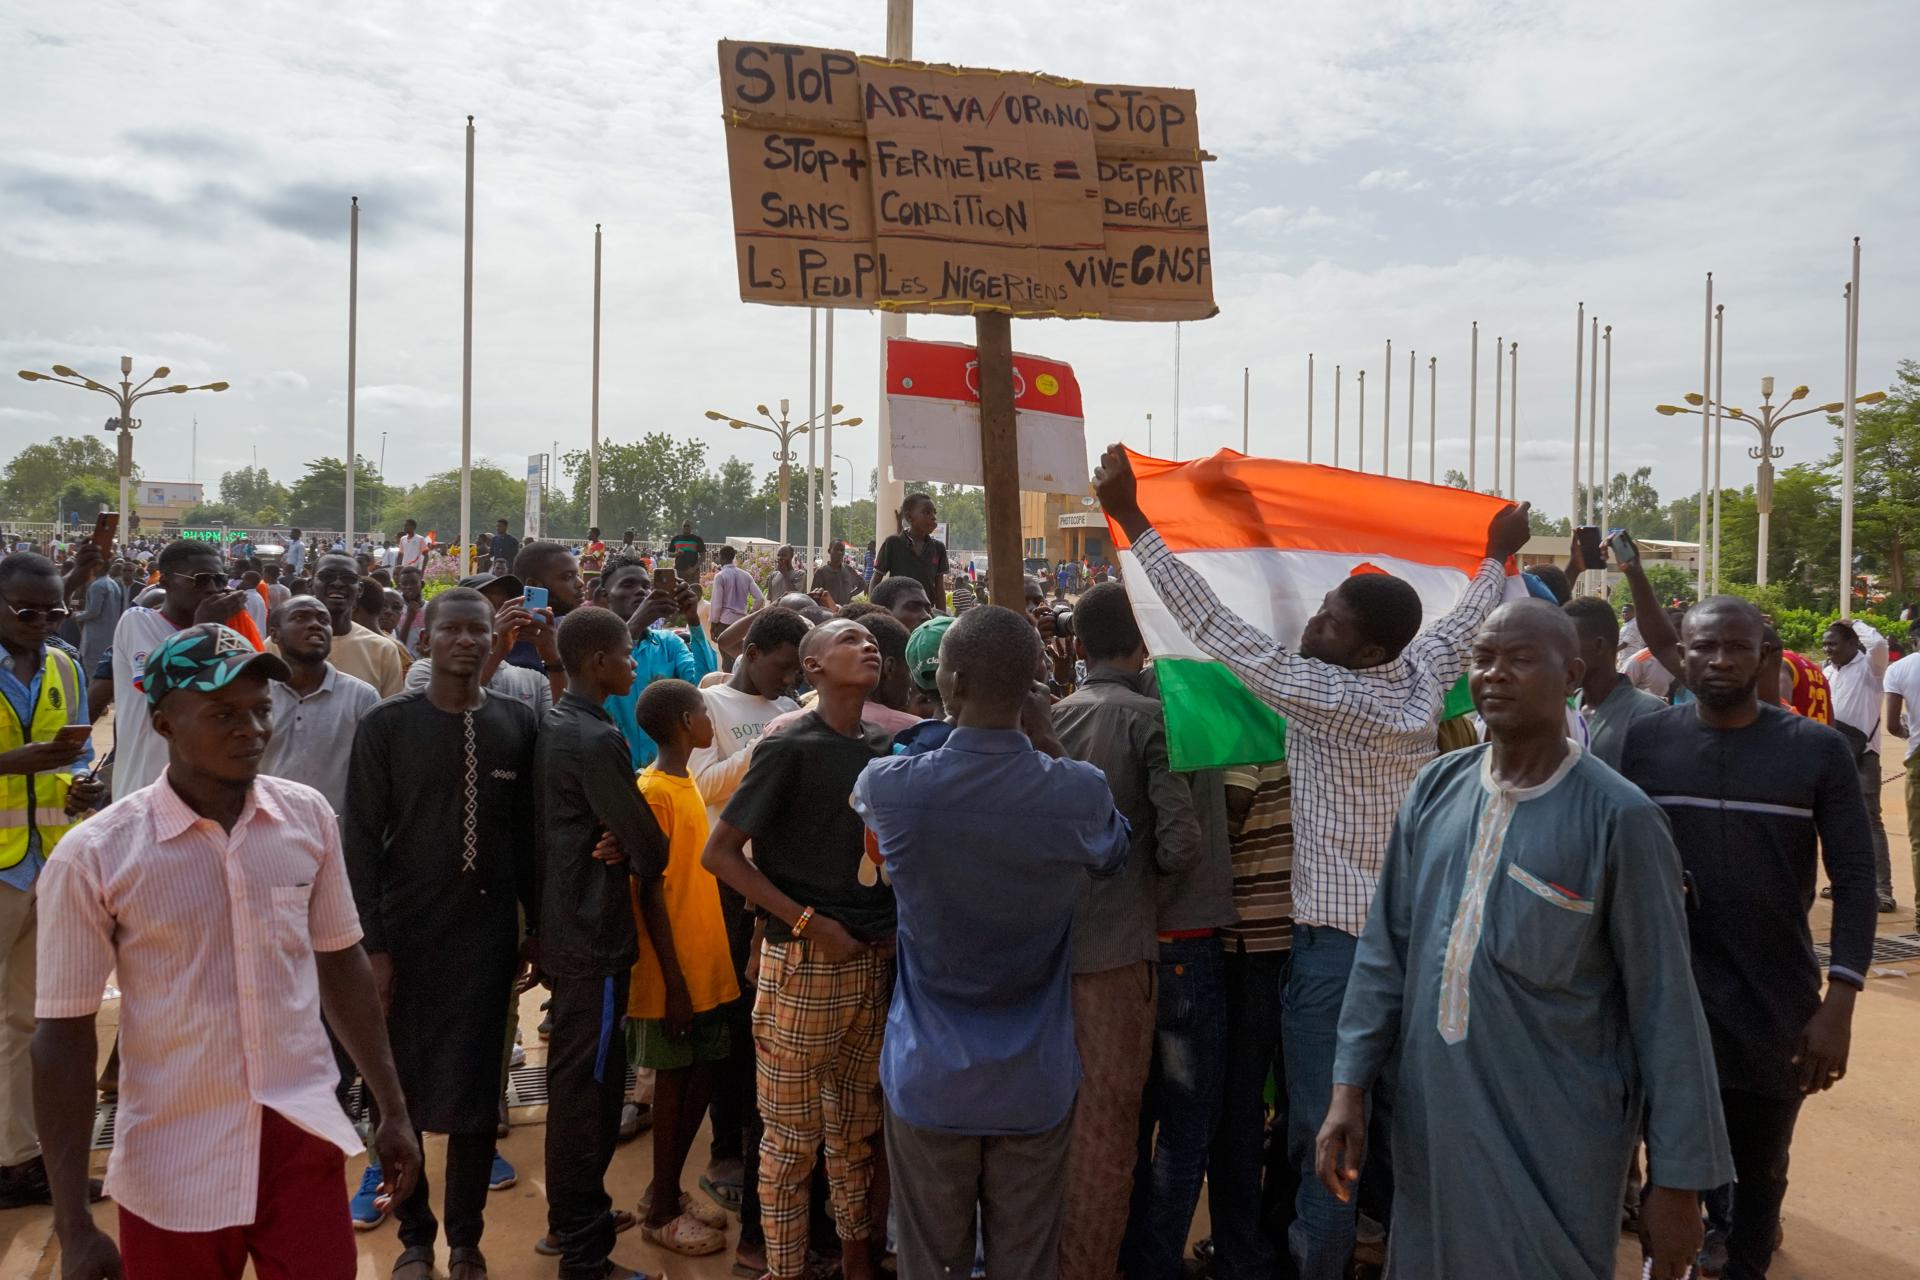 Supporters of the military display a sign that reads 'Stop Areva/Orano, Get out', during a rally in Niamey, Niger, 06 August 2023, (issued 07 August 2023). EFE/EPA/ISSIFOU DJIBO